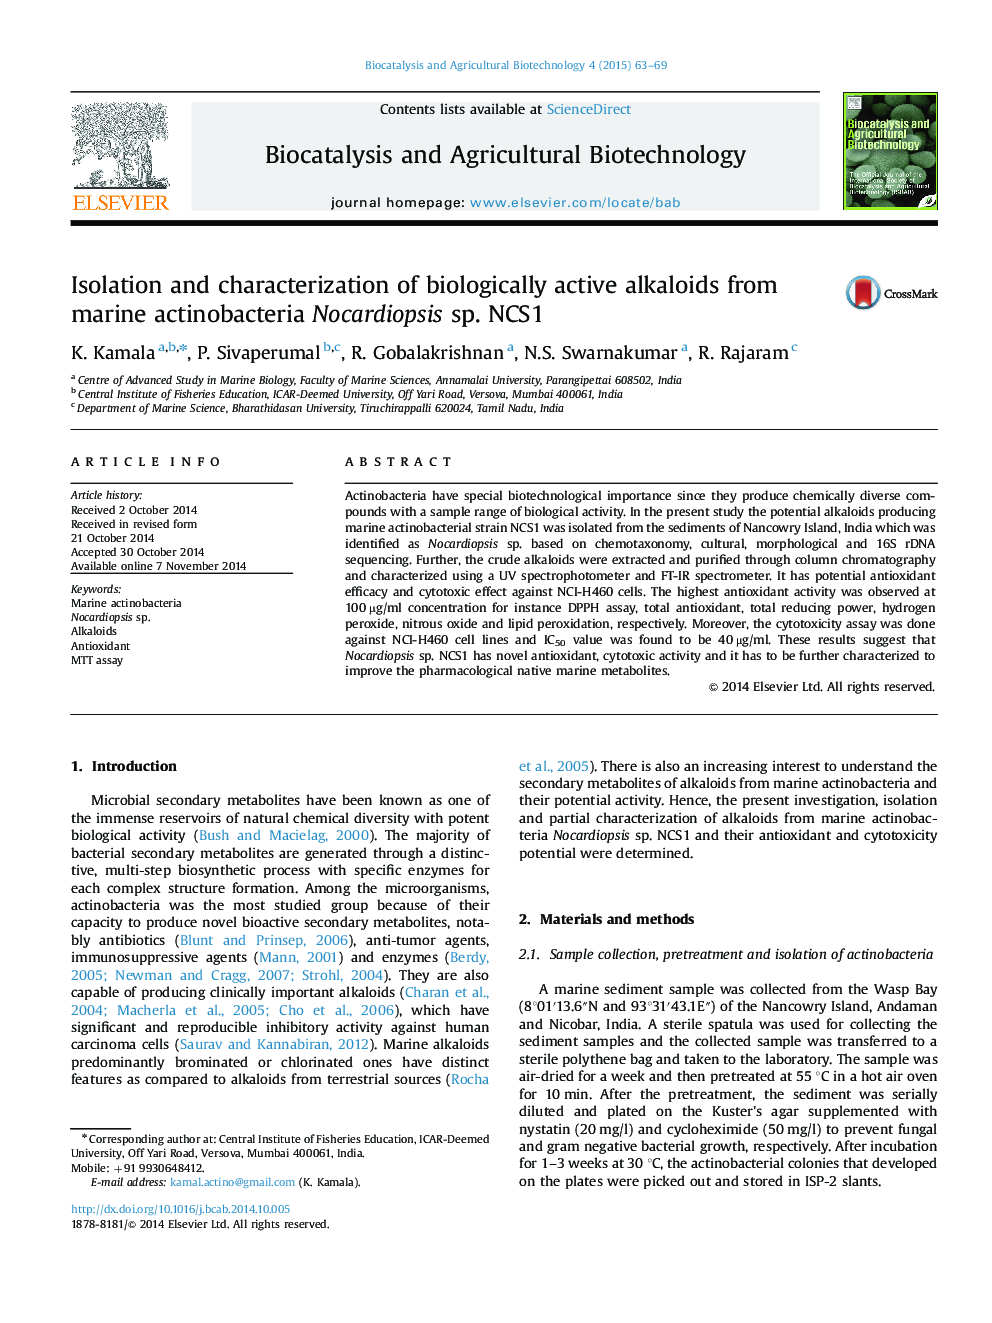 Isolation and characterization of biologically active alkaloids from marine actinobacteria Nocardiopsis sp. NCS1